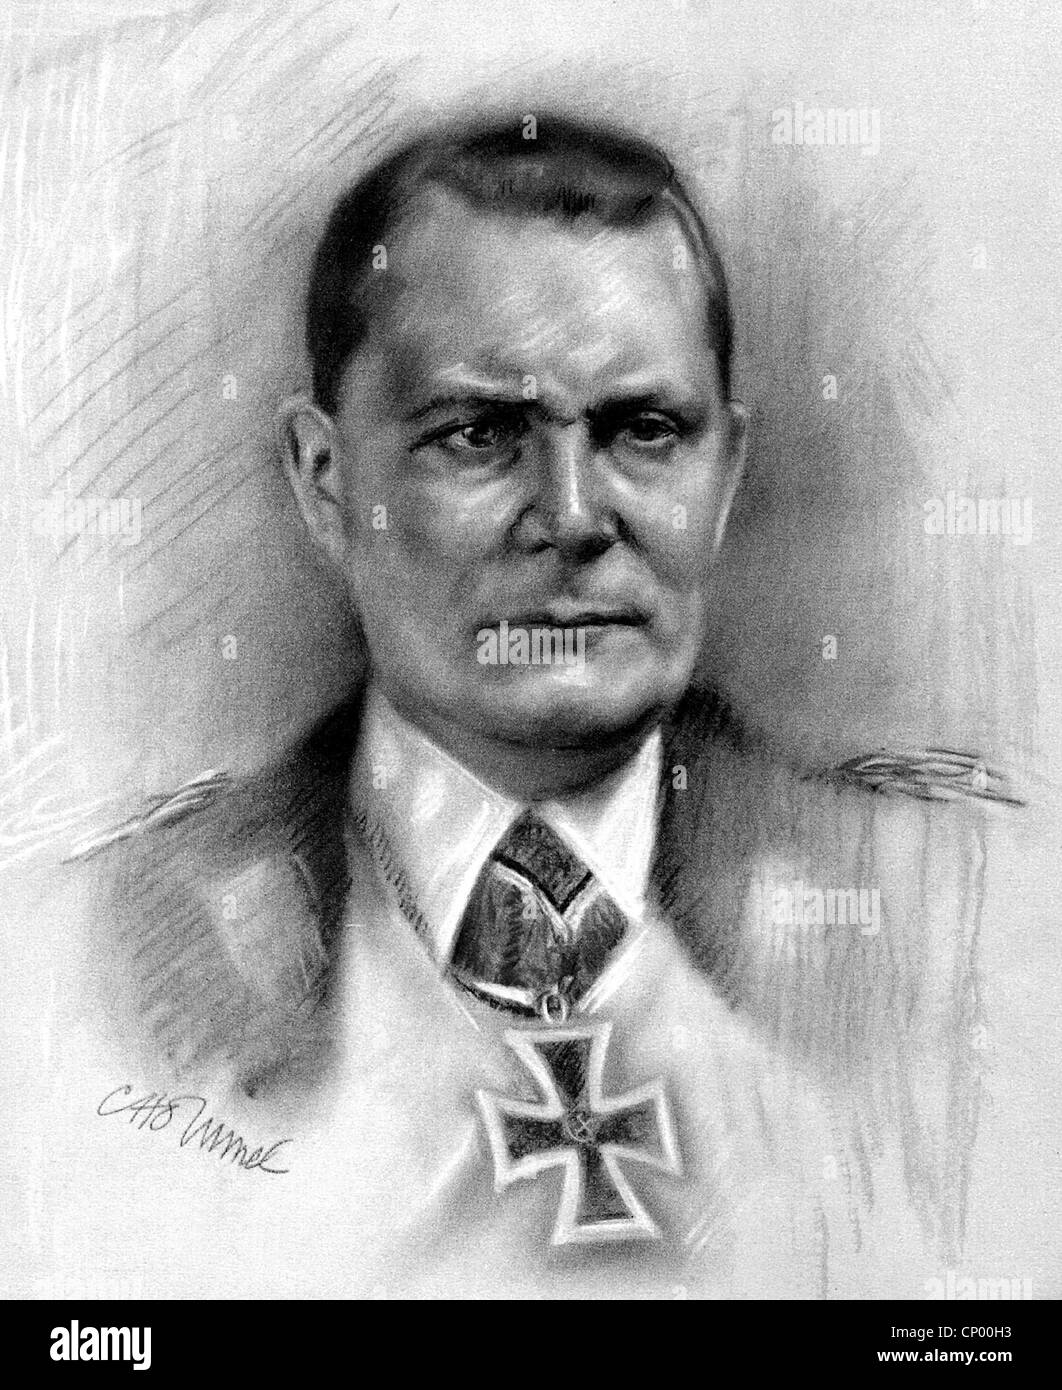 Goering, Hermann, 12.1.1893 - 15.10.1946, German politician (NSDAP), Reich Marshal, commander in chief of the Luftwaffe (German air force) 1935 - 1945, portrait, pastel, by Otto Immel, circa 1940, Stock Photo